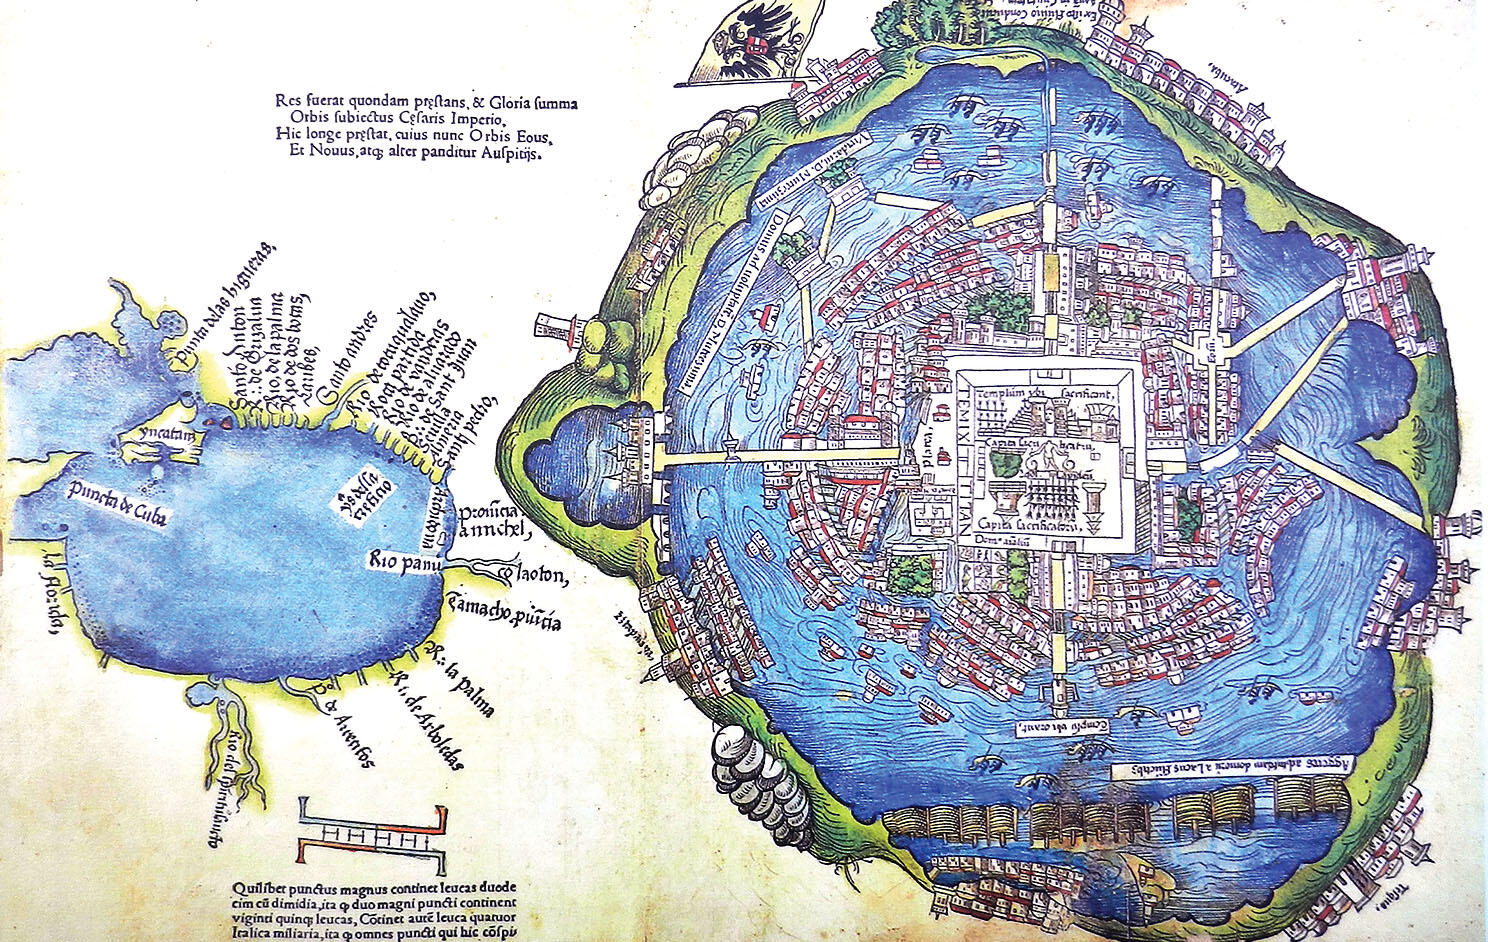 The “Nuremberg map” of Tenochtitlán shows Lake Texcoco surrounding the city in the Valley of Mexico. (Image courtesy of the Edward E. Ayer Digital Collection (Newberry Library)).